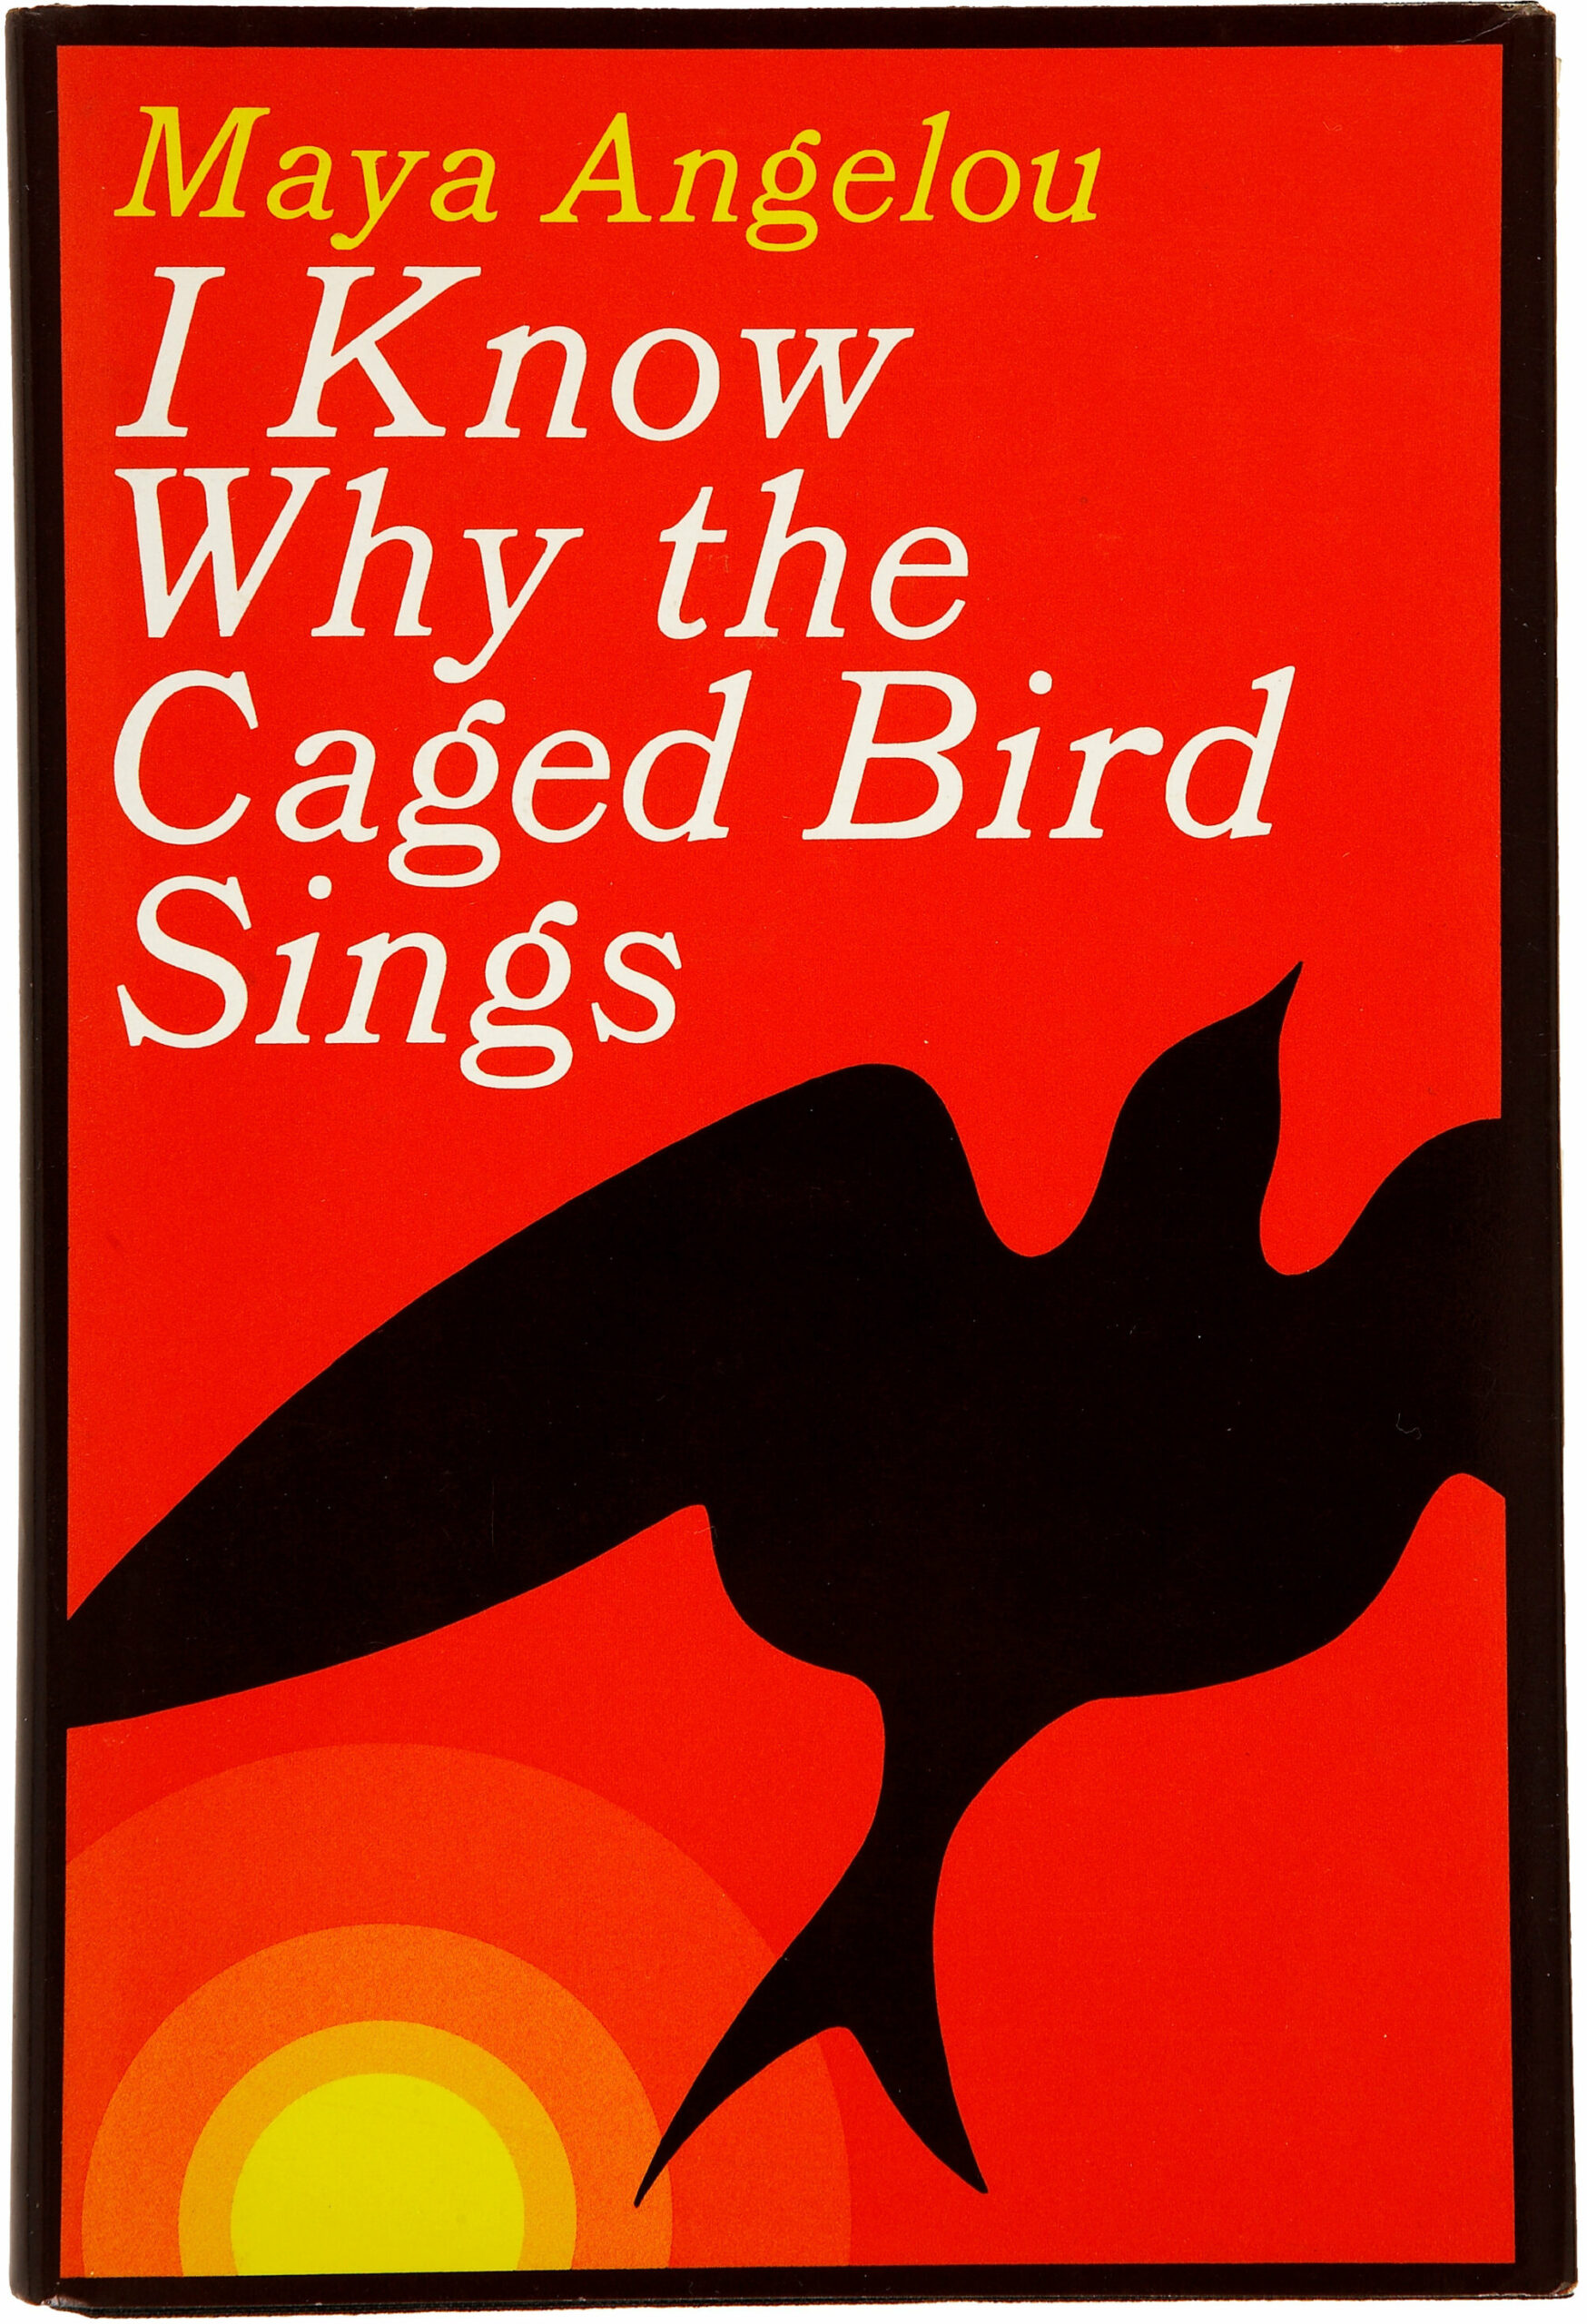 I Know Why the Caged Bird Sings Characters